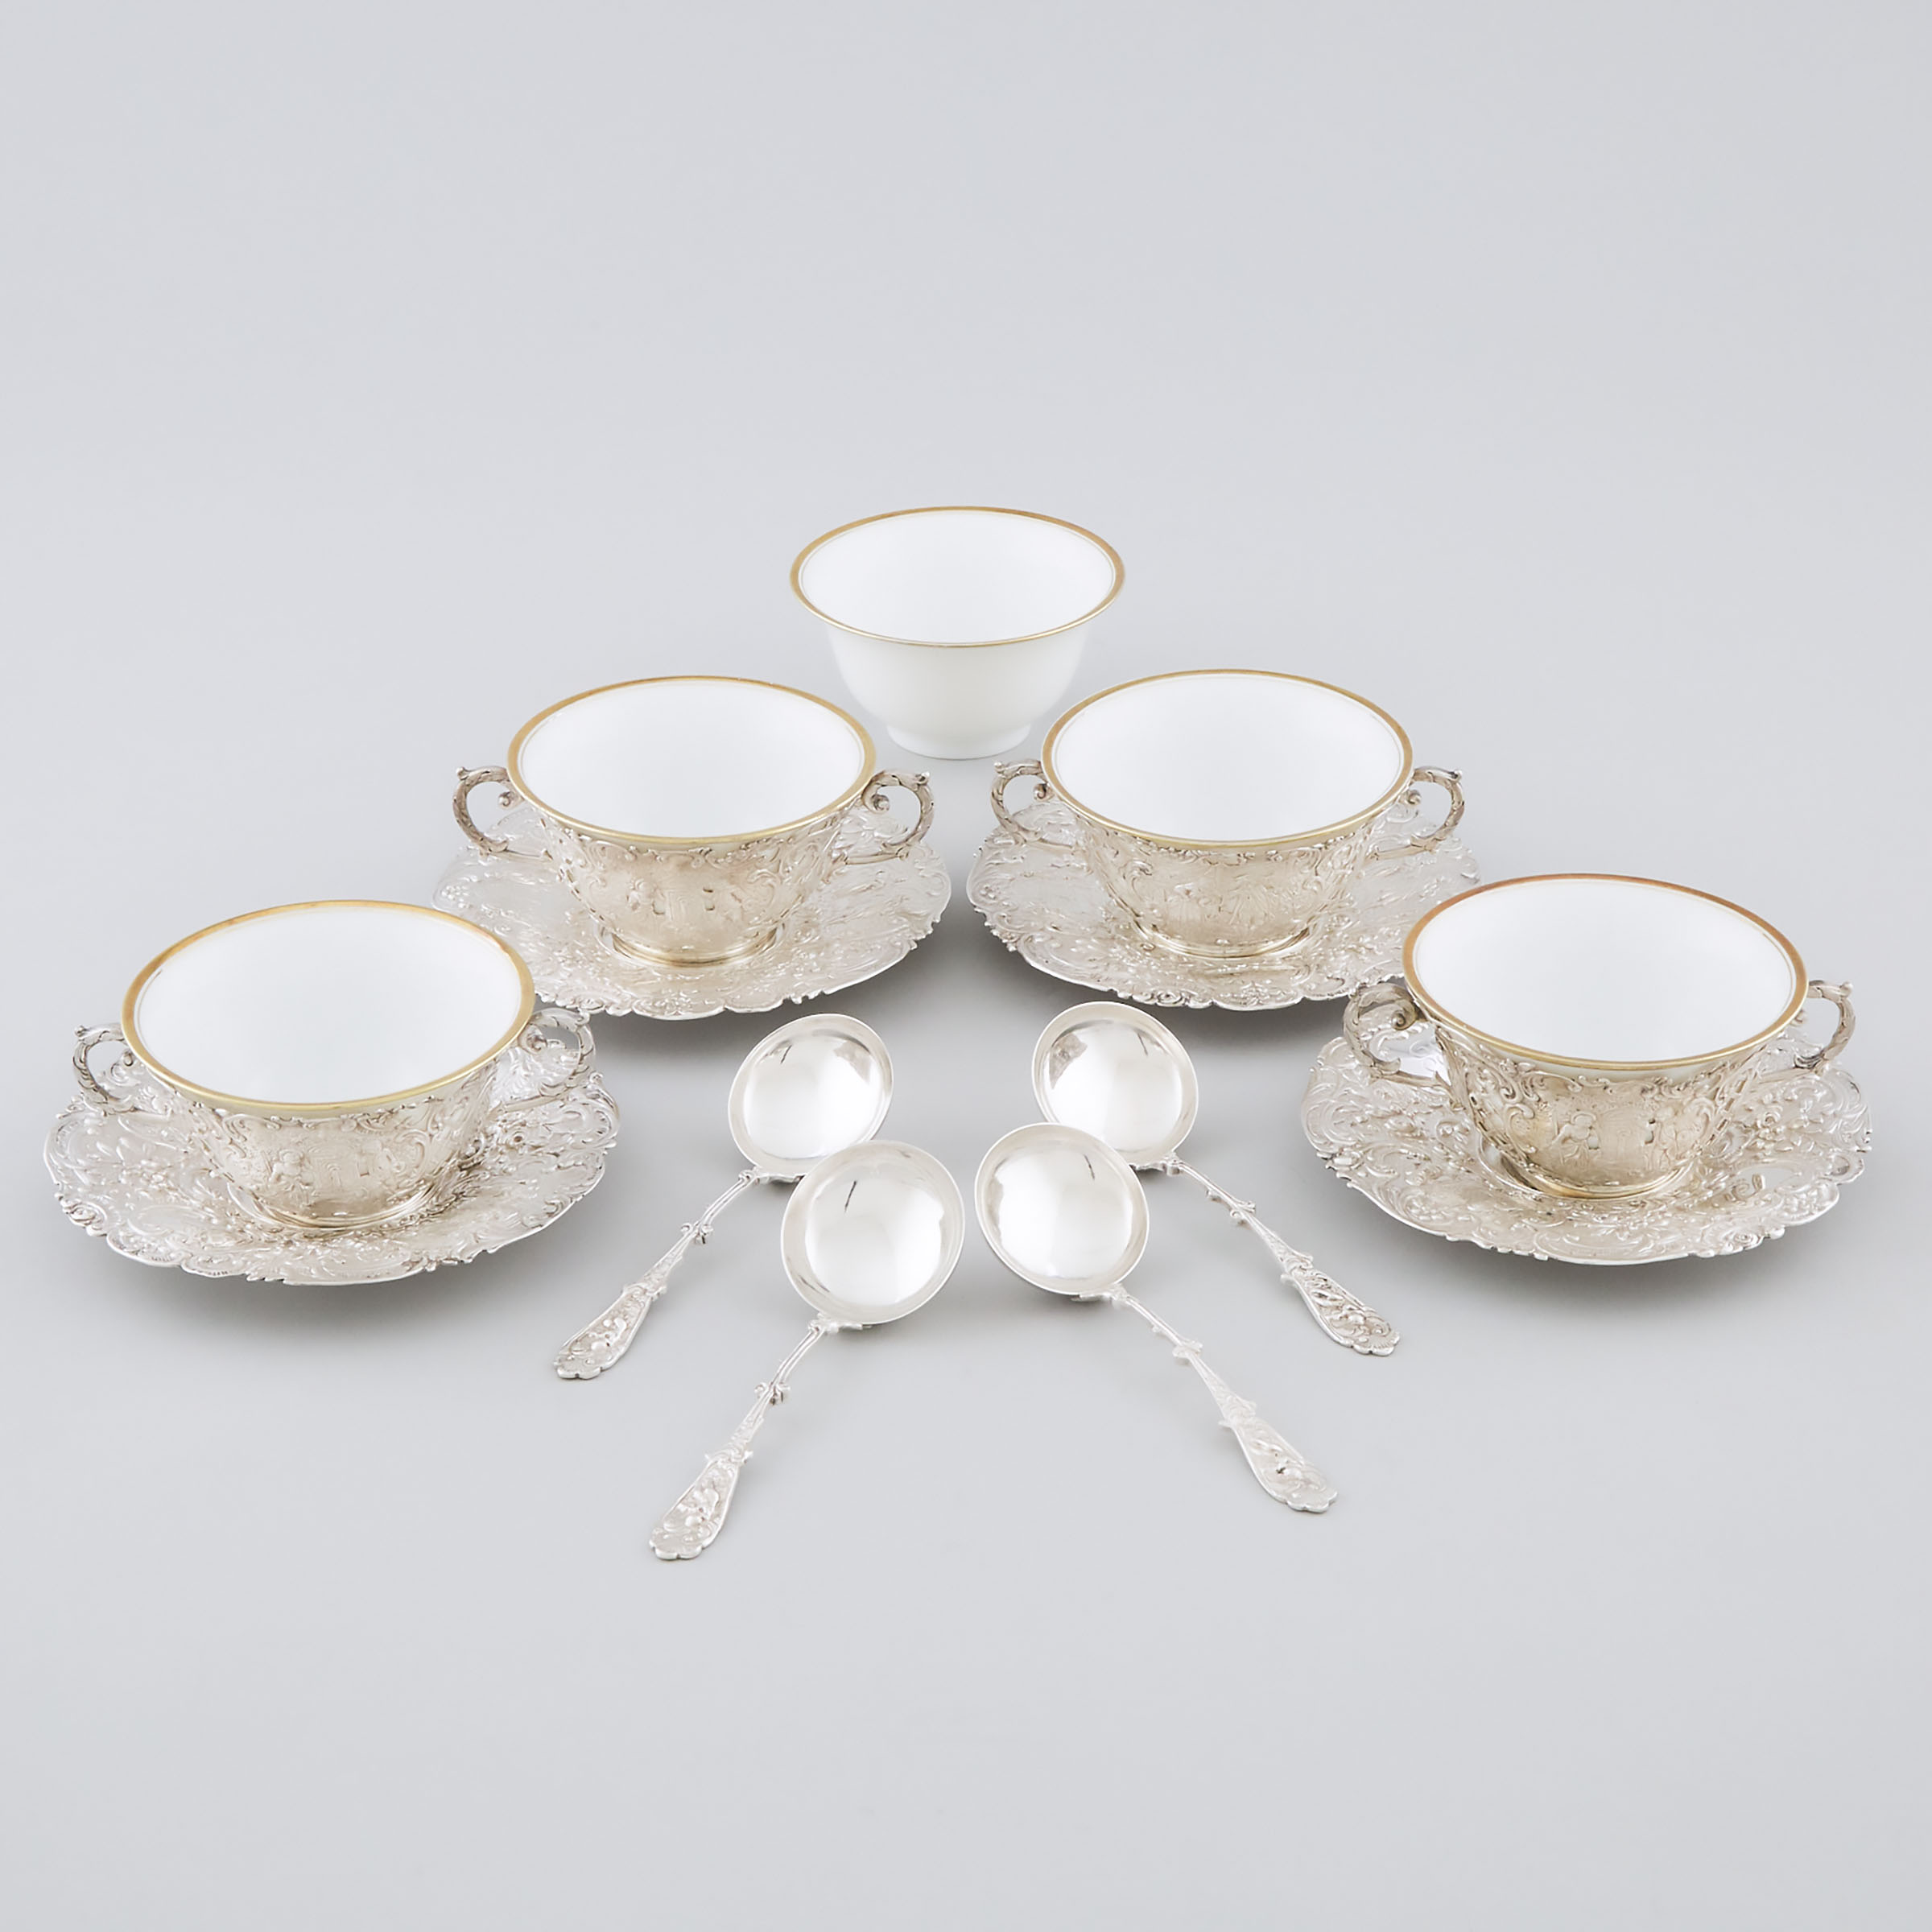 Four German Silver Two-Handled Soup Cups with Stands and Spoons, possibly Wolf & Knell, Hanau, early 20th century